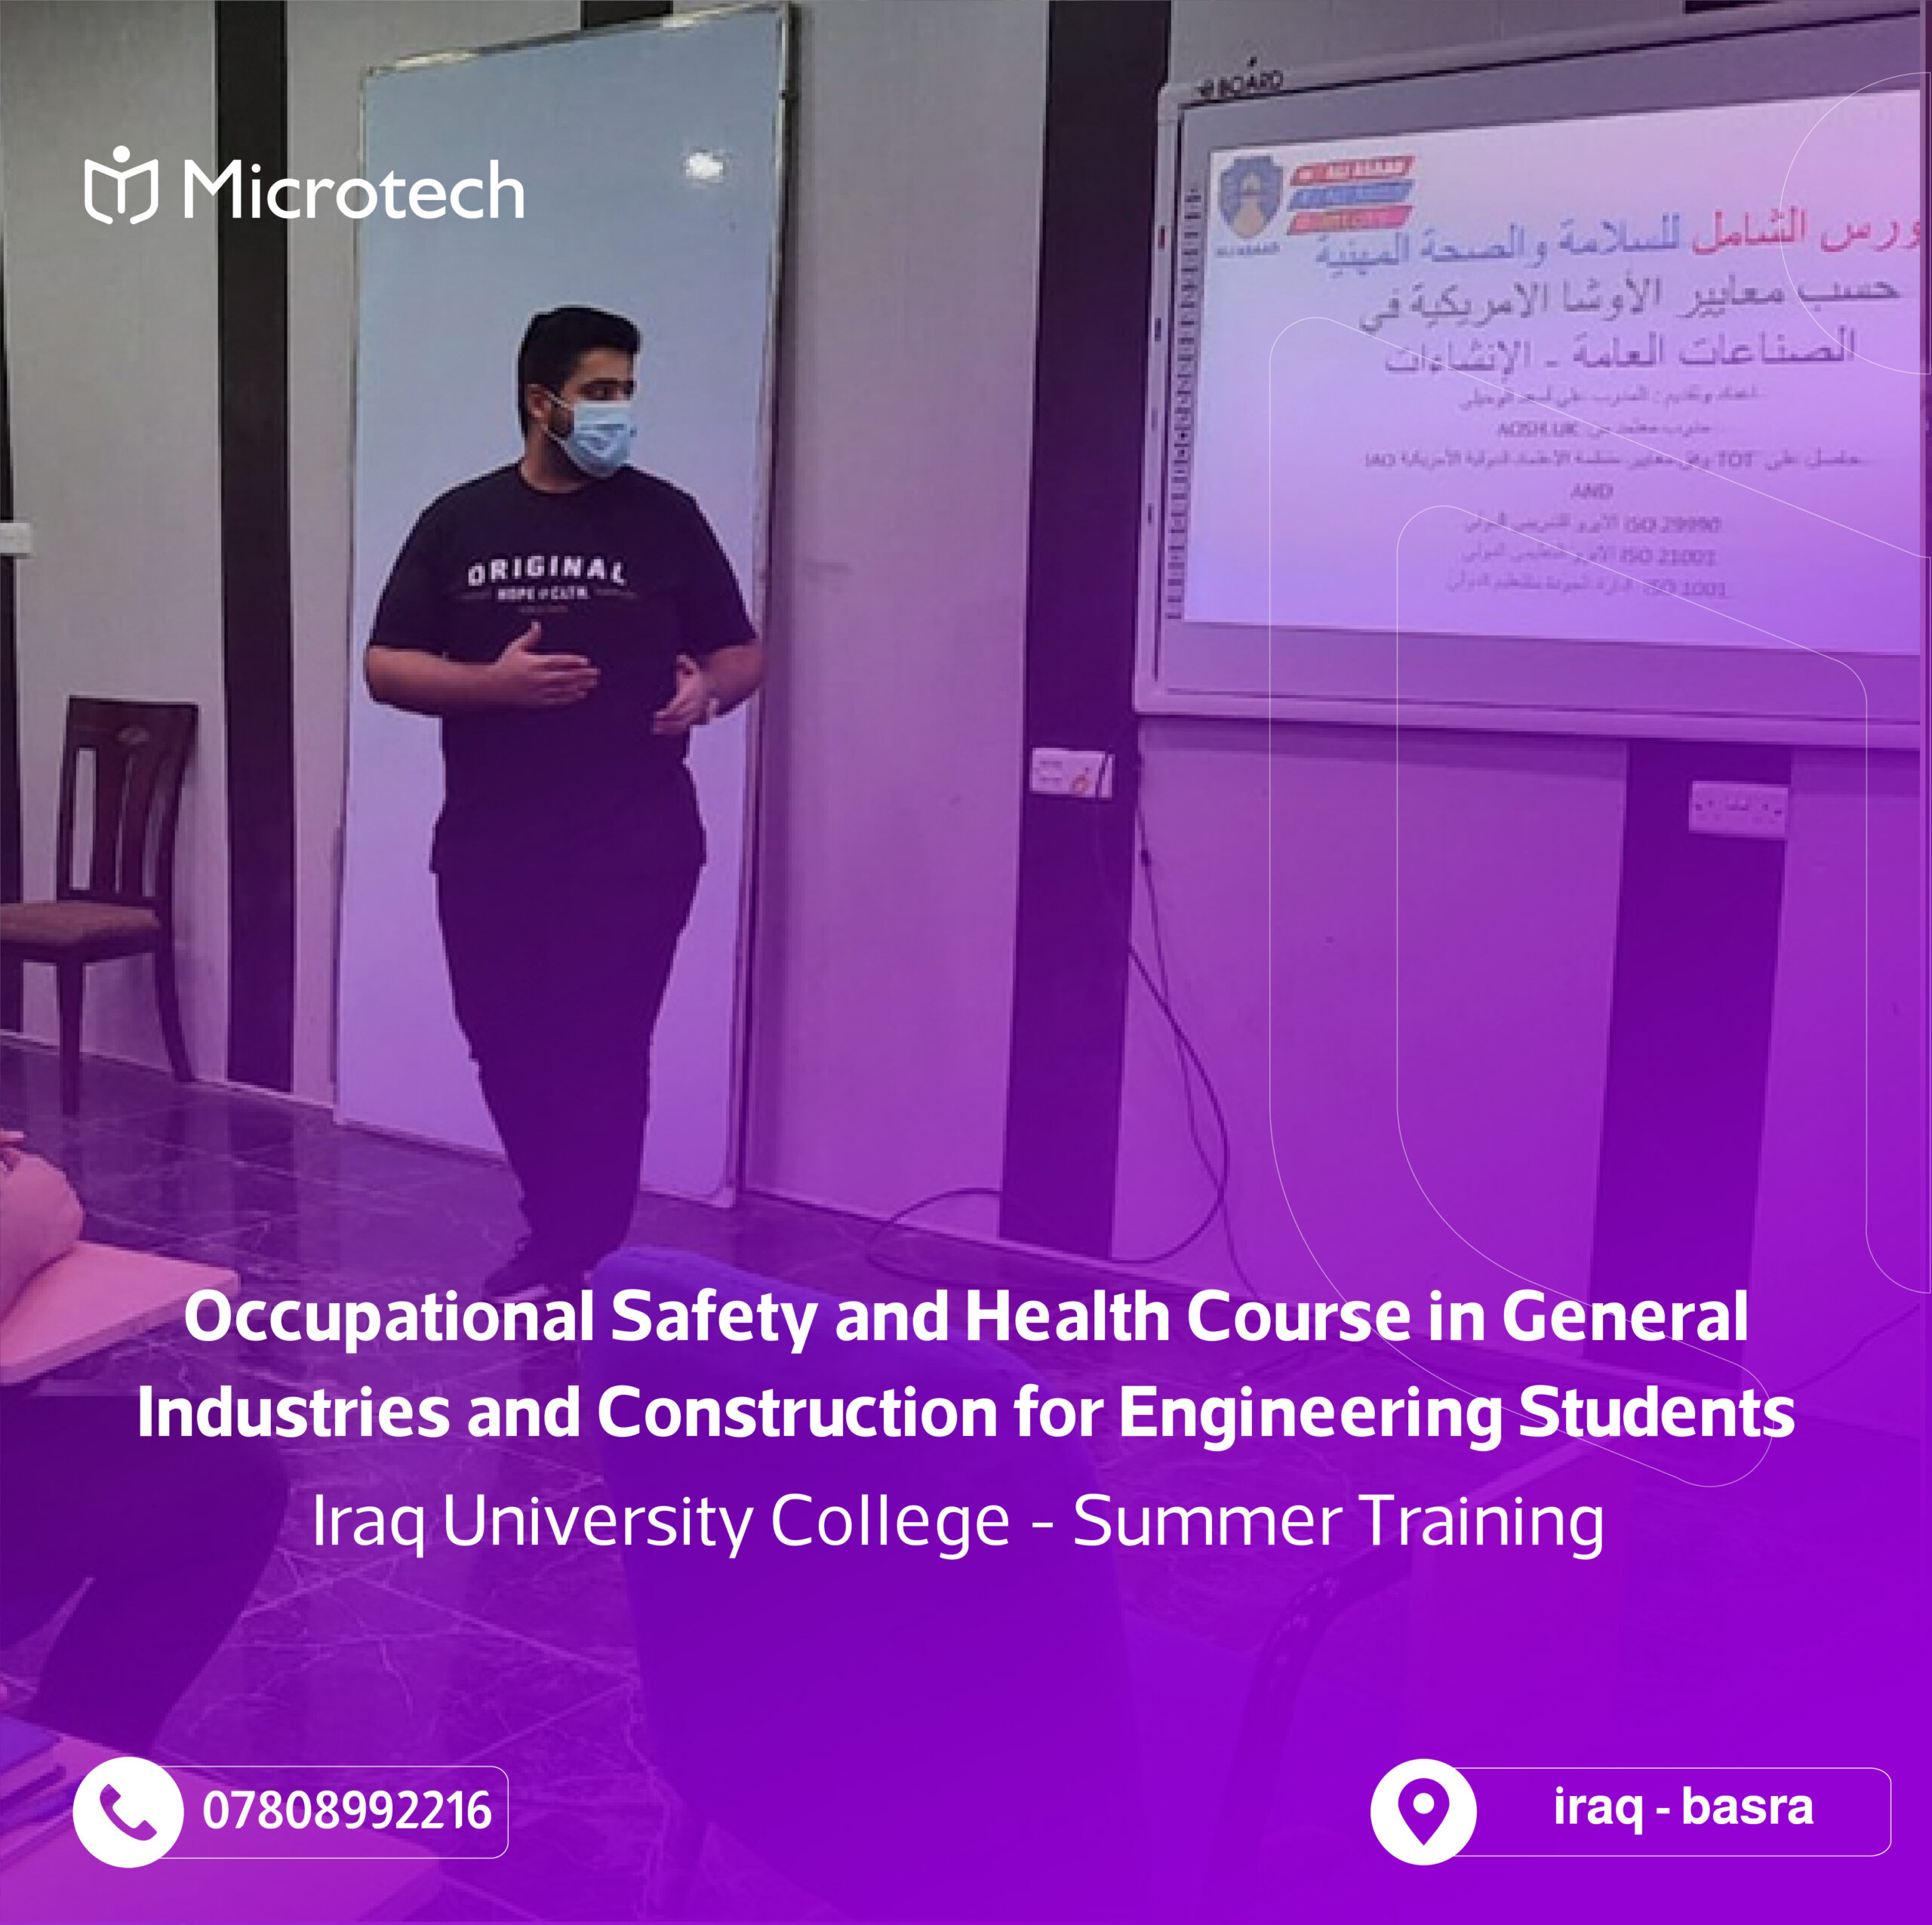 Occupational Safety and Health Course in General Industries and Construction